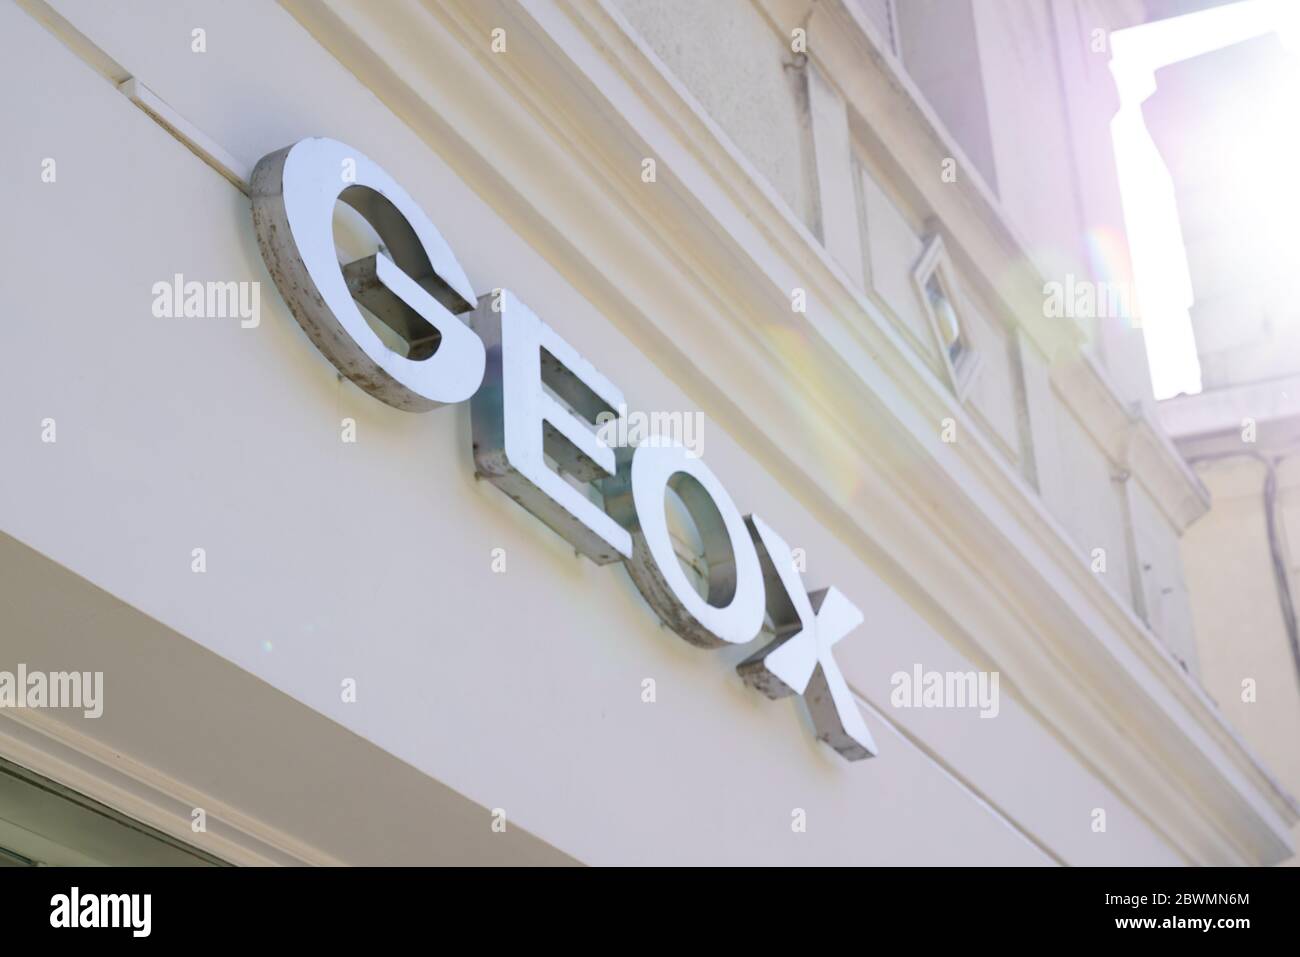 Bordeaux , Aquitaine / France - 05 05 2020 : Geox shoes store sign text and  shop logo for Italian clothing Stock Photo - Alamy